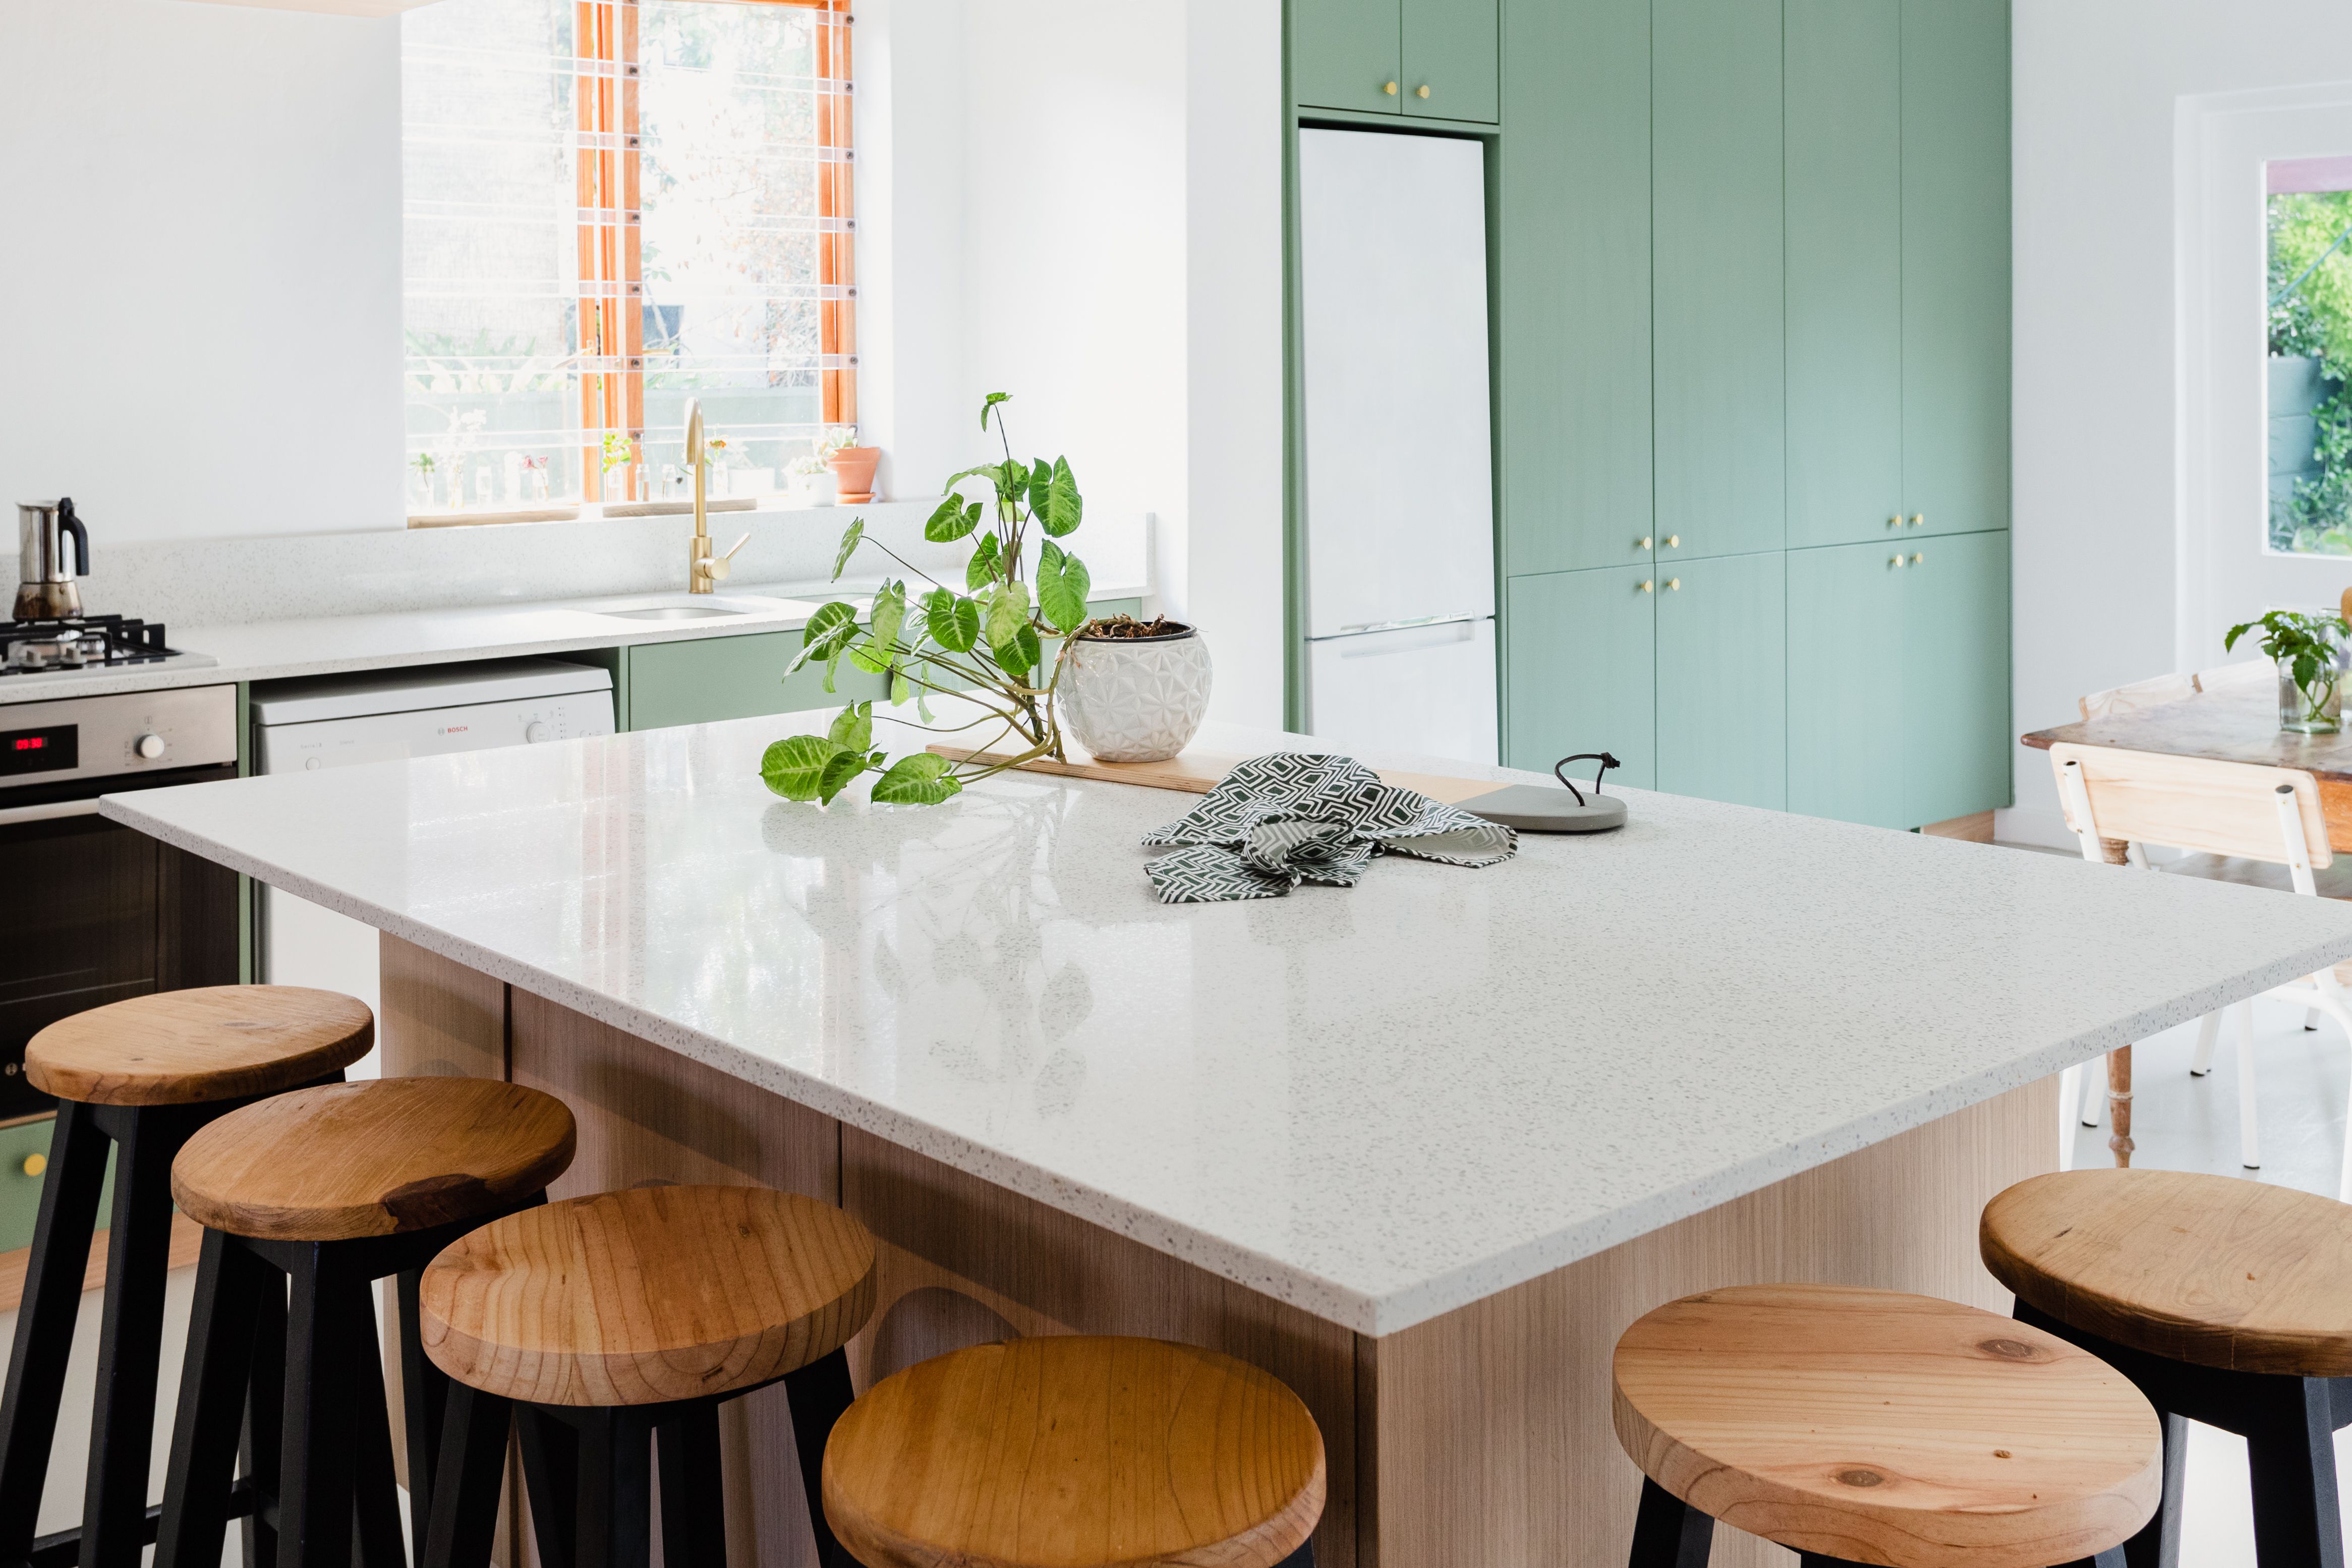 Quartz Countertops: What to Know Before You Buy